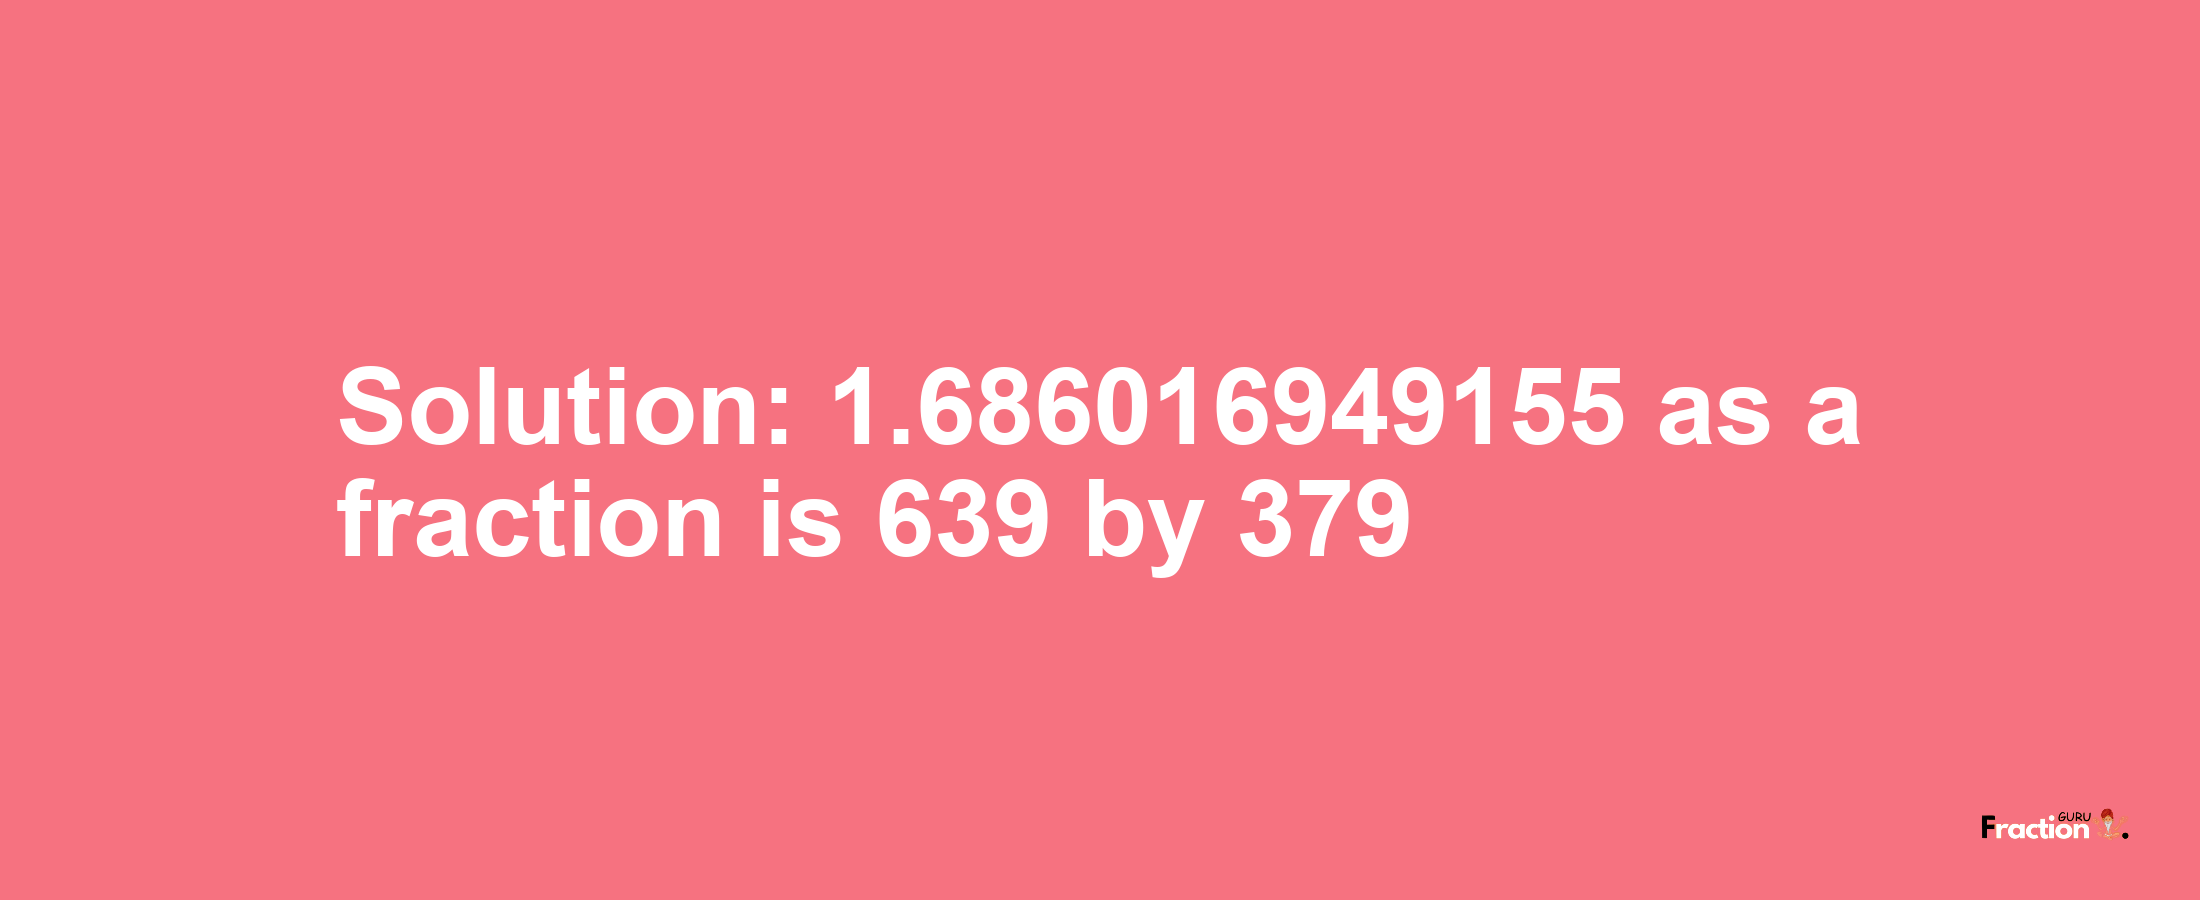 Solution:1.686016949155 as a fraction is 639/379